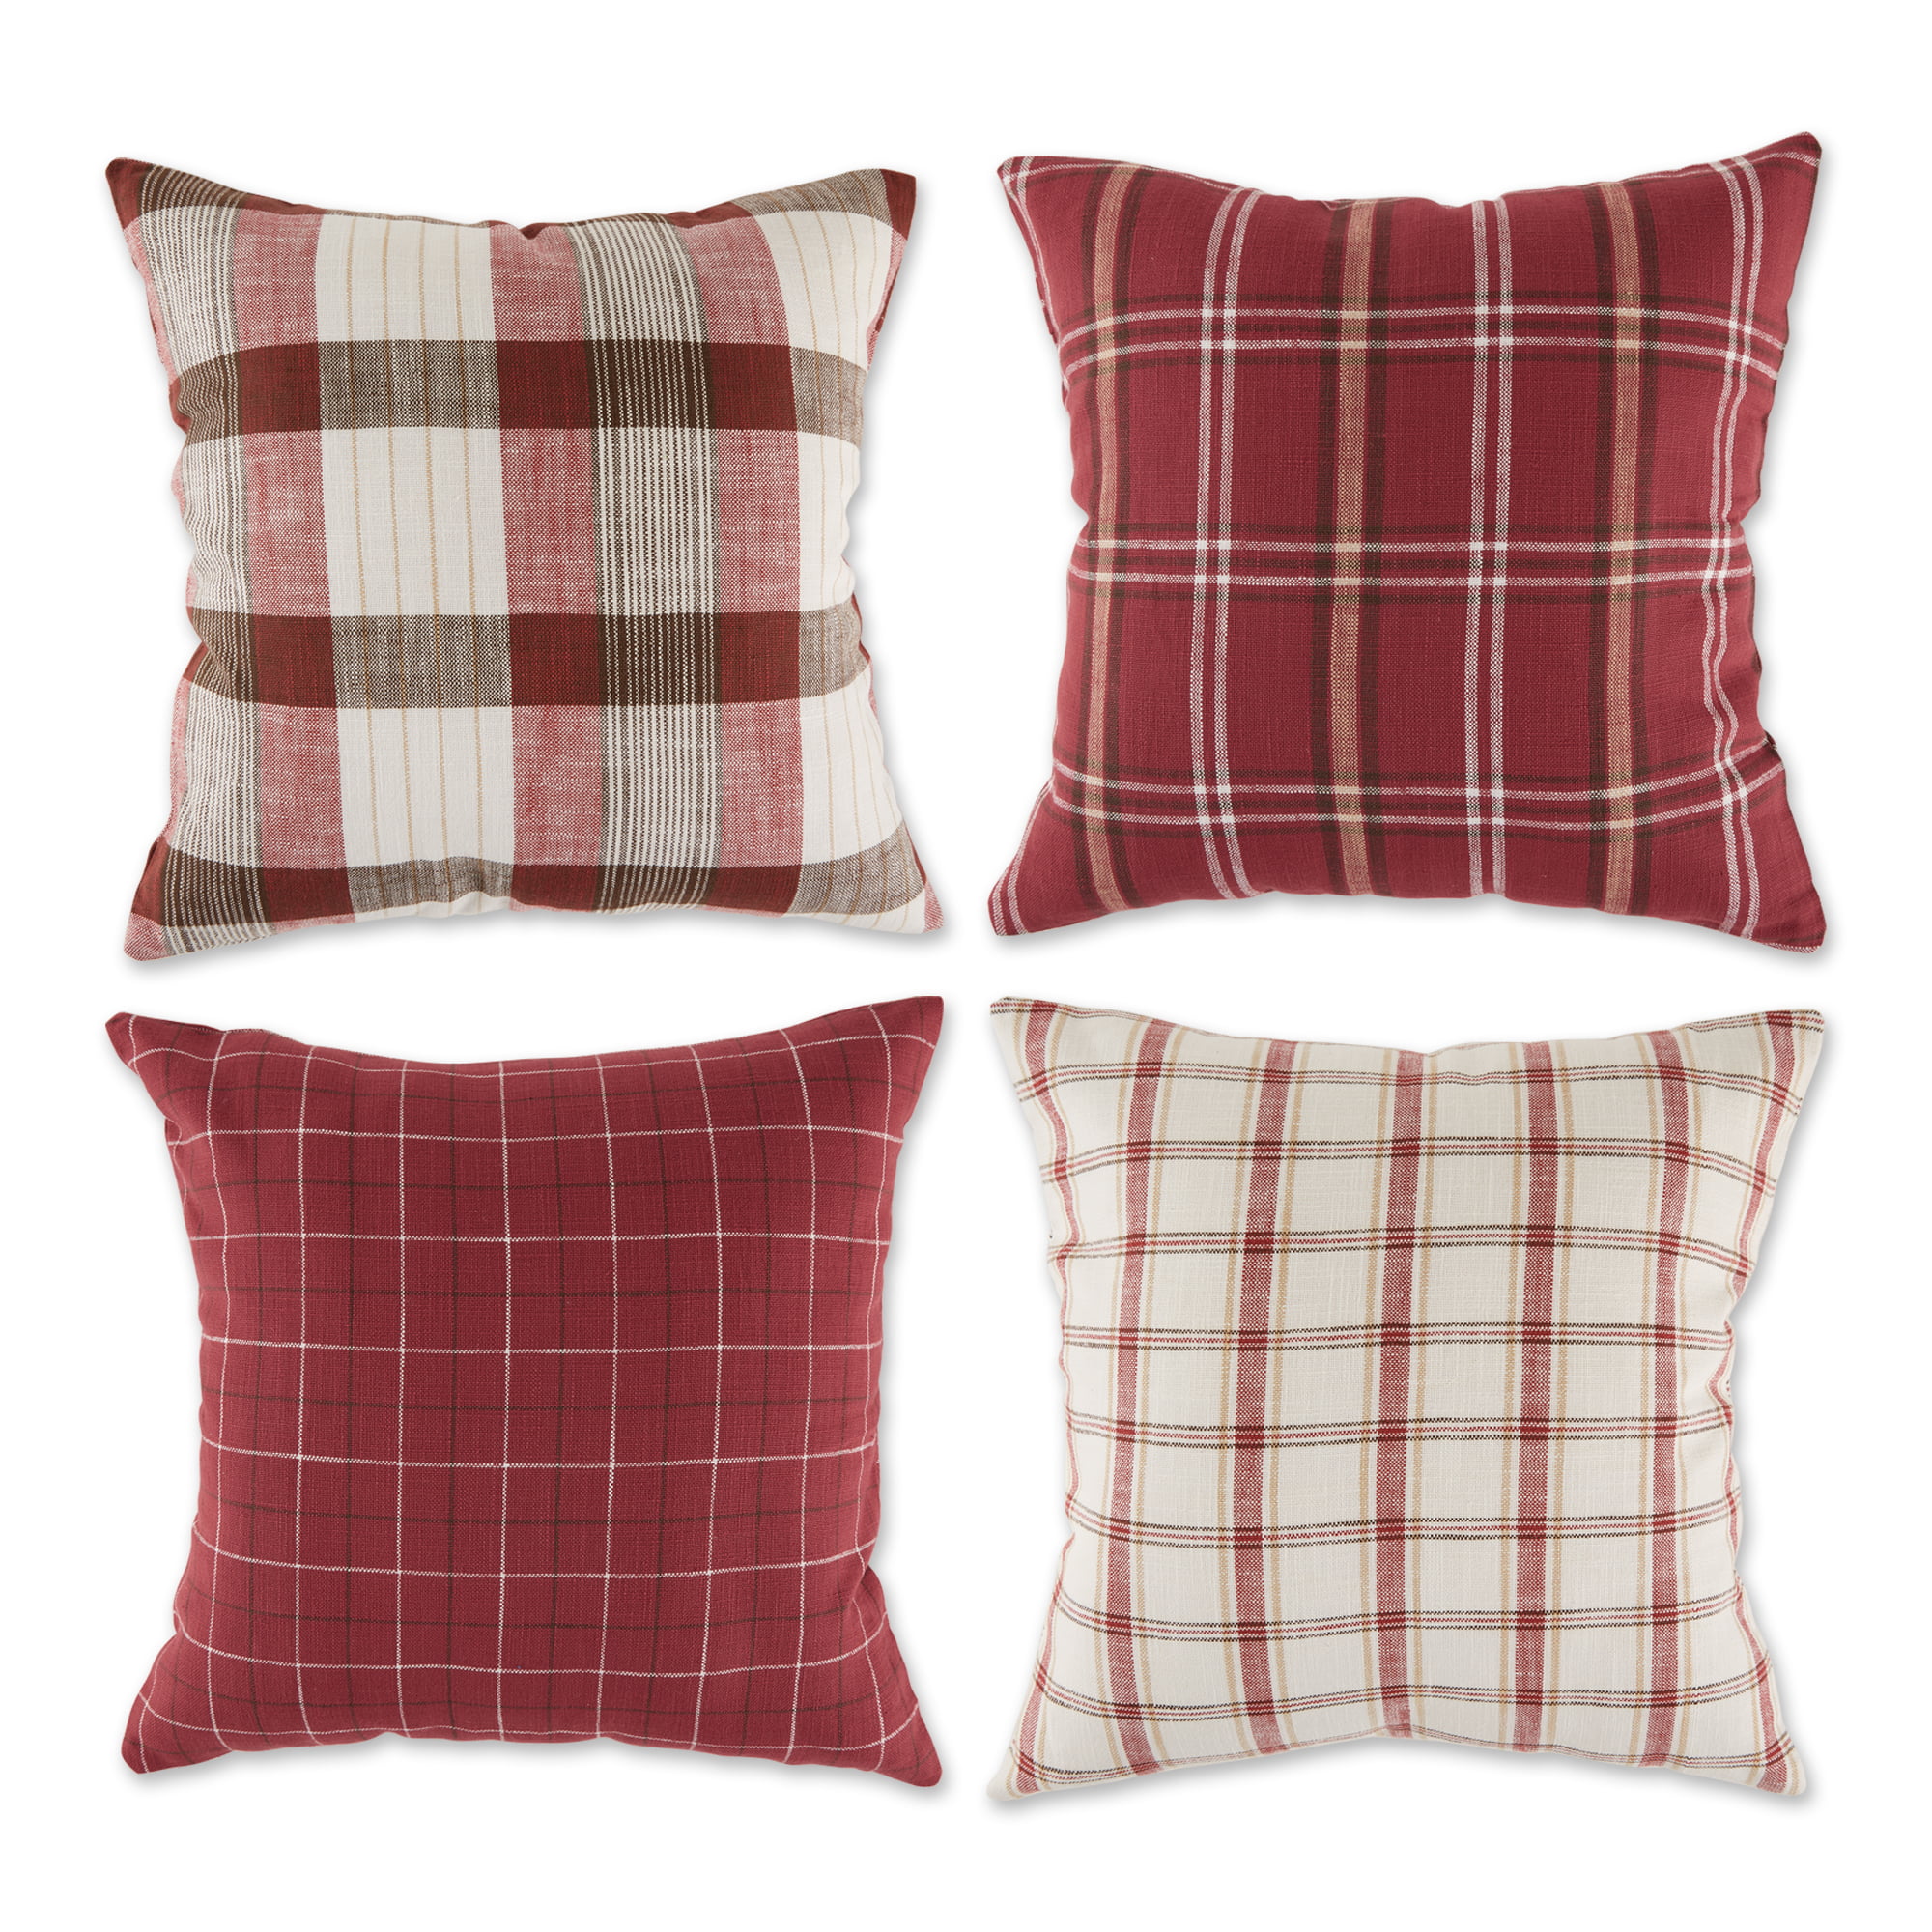 DII Throw Pillow Cover Collection Decorative Square 18x18 Autumn Plaid 4 Piece